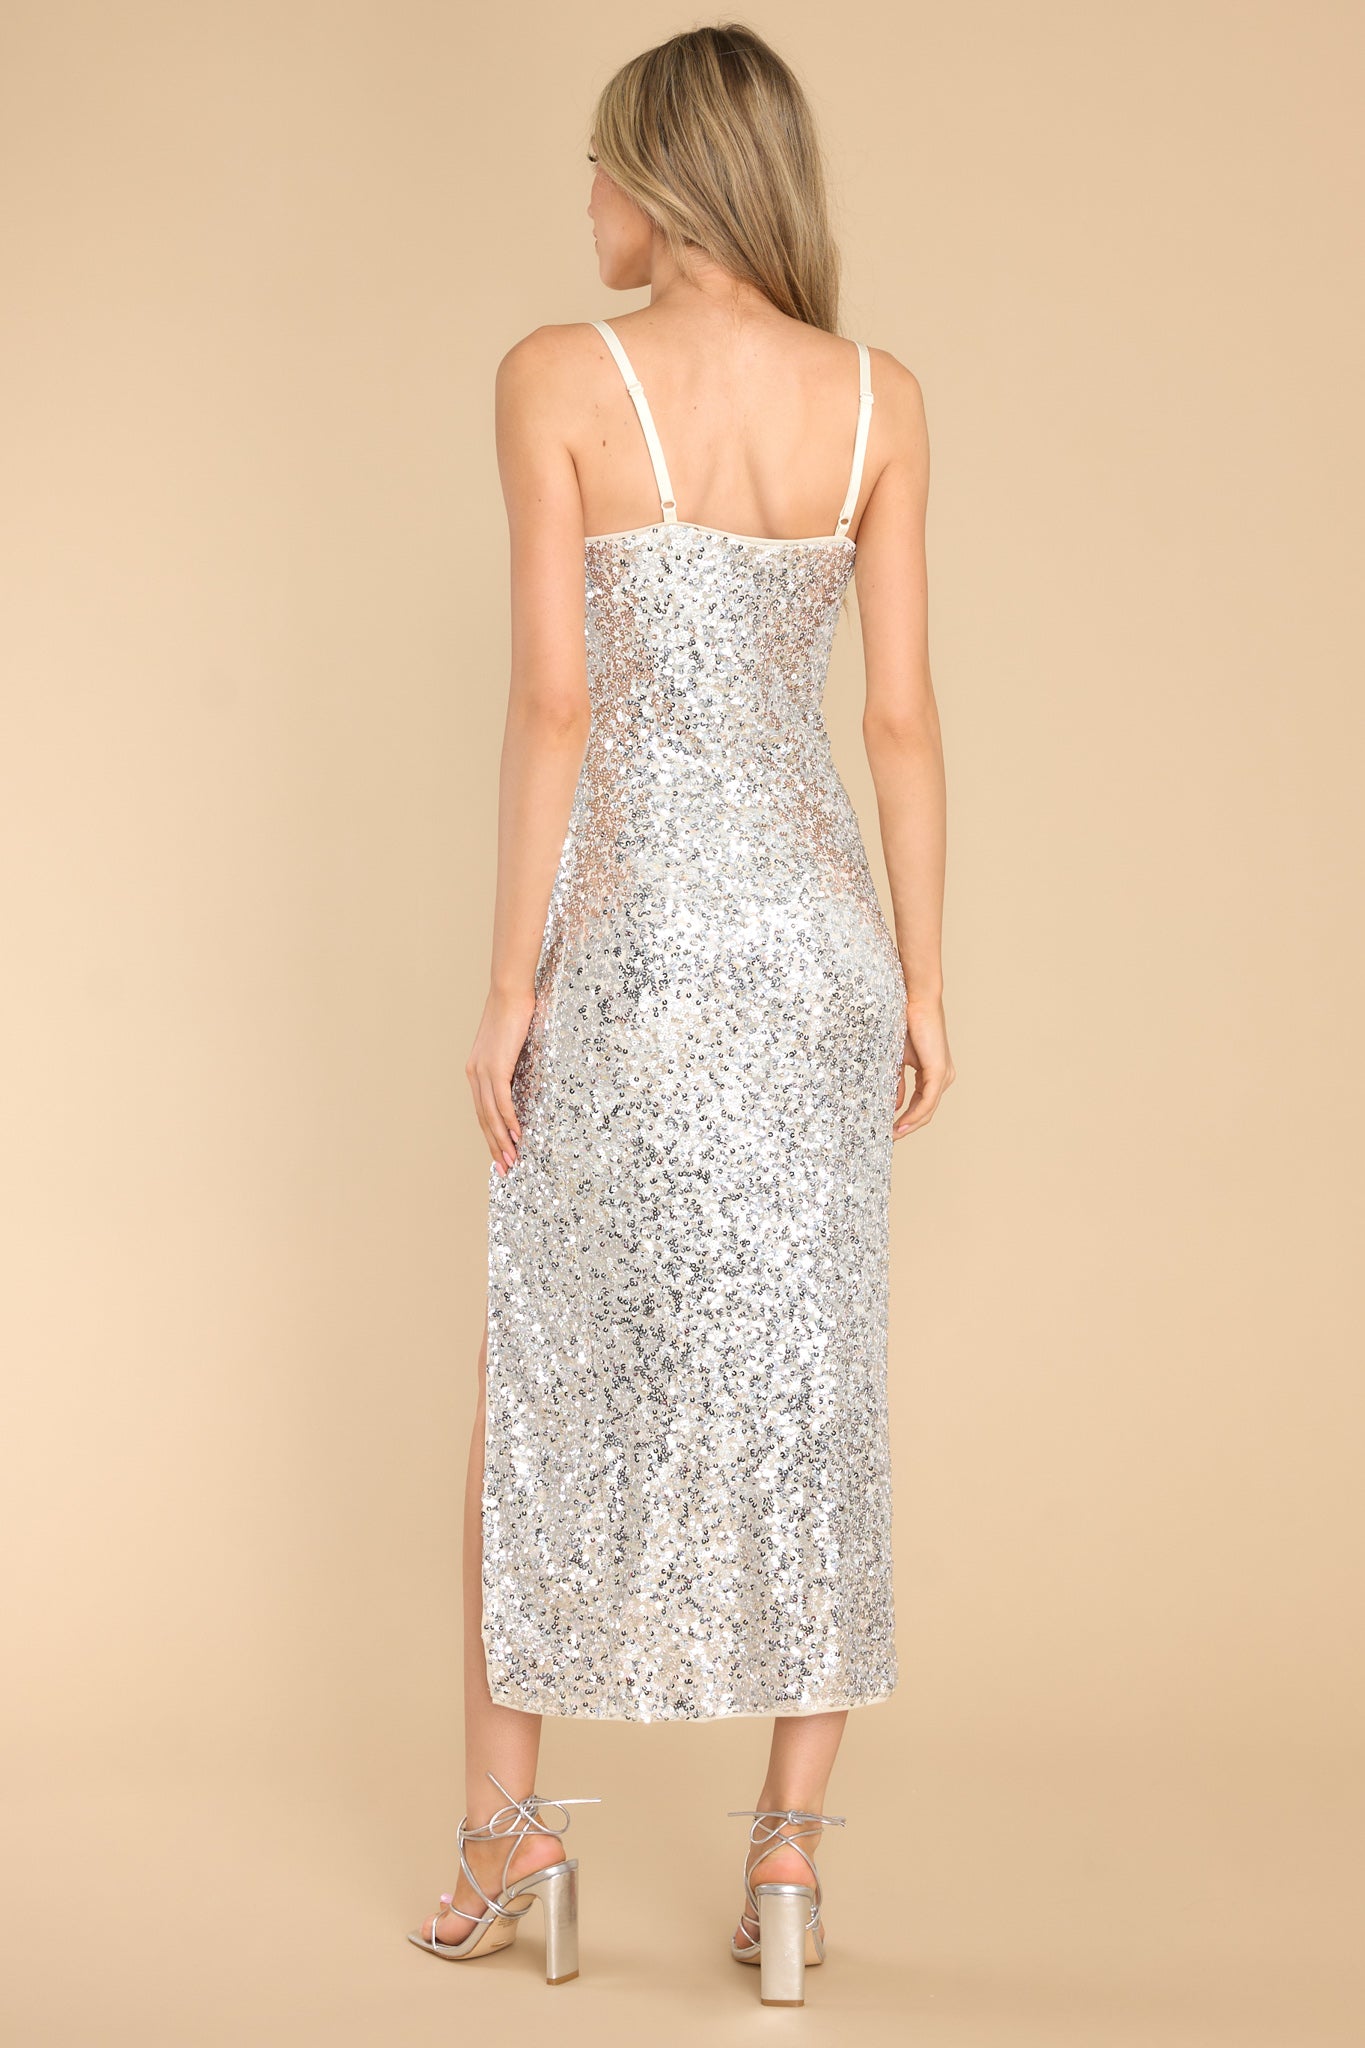 Back view of this dress that features a cowl neckline, adjustable spaghetti straps, full body sequin detailing, and a front slit.